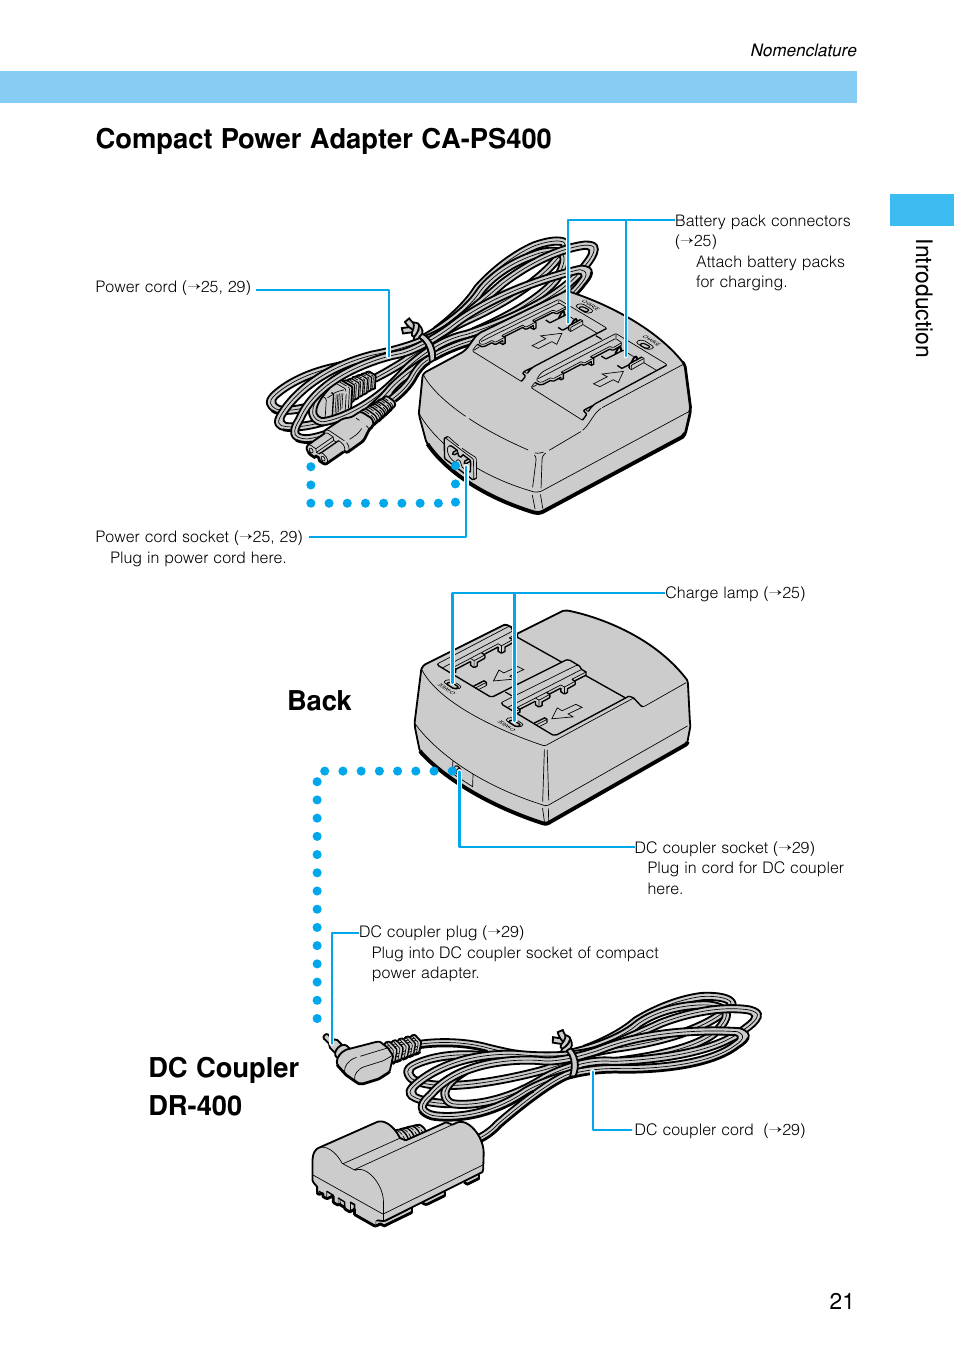 Compact power adapter ca-ps400, Back, Dc coupler dr-400 | Canon EOS D30 User Manual | Page 21 / 152